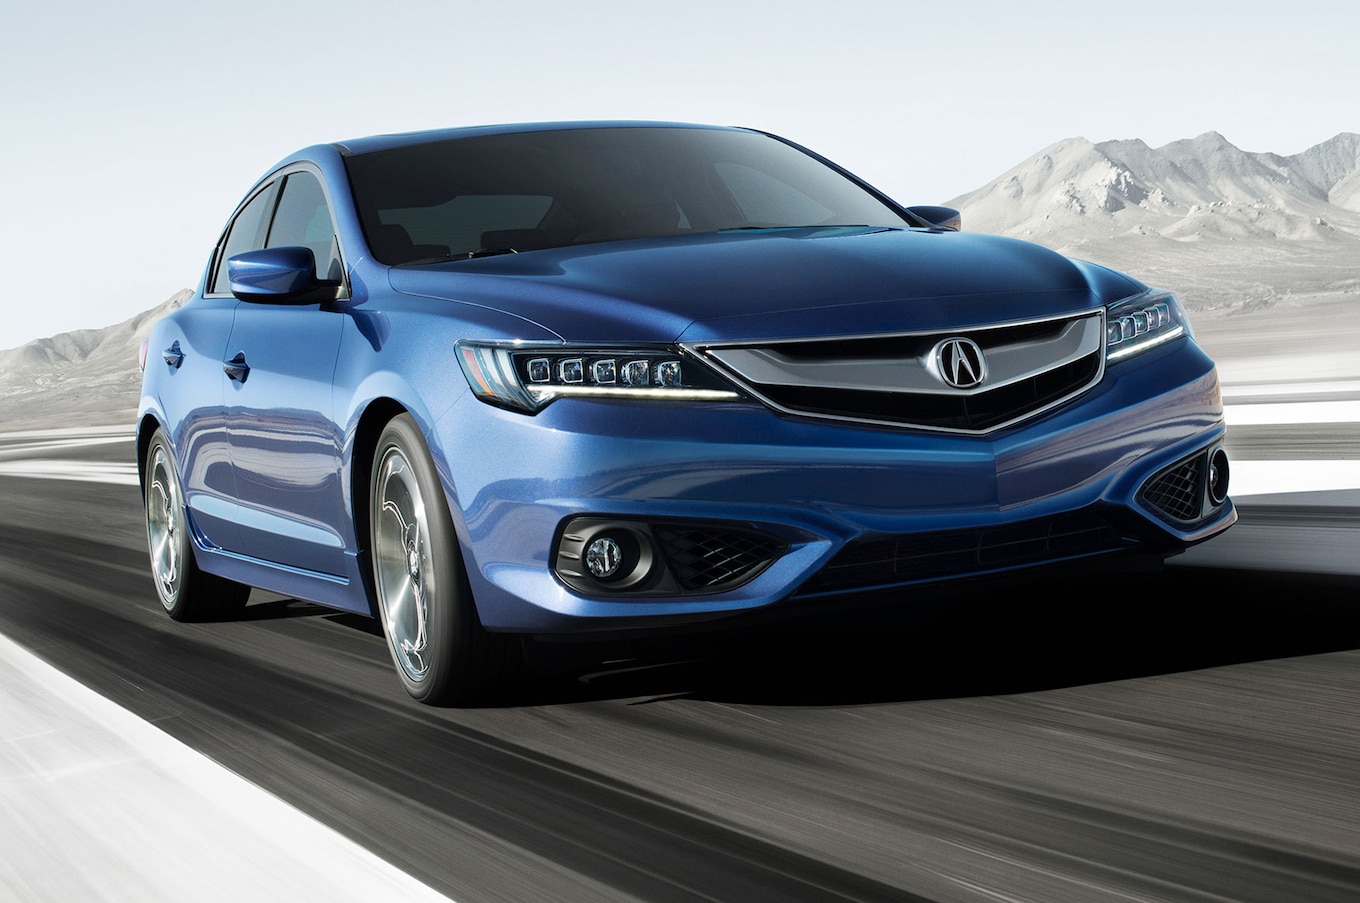 2016-Acura-ILX-front-side-view-in-motion1